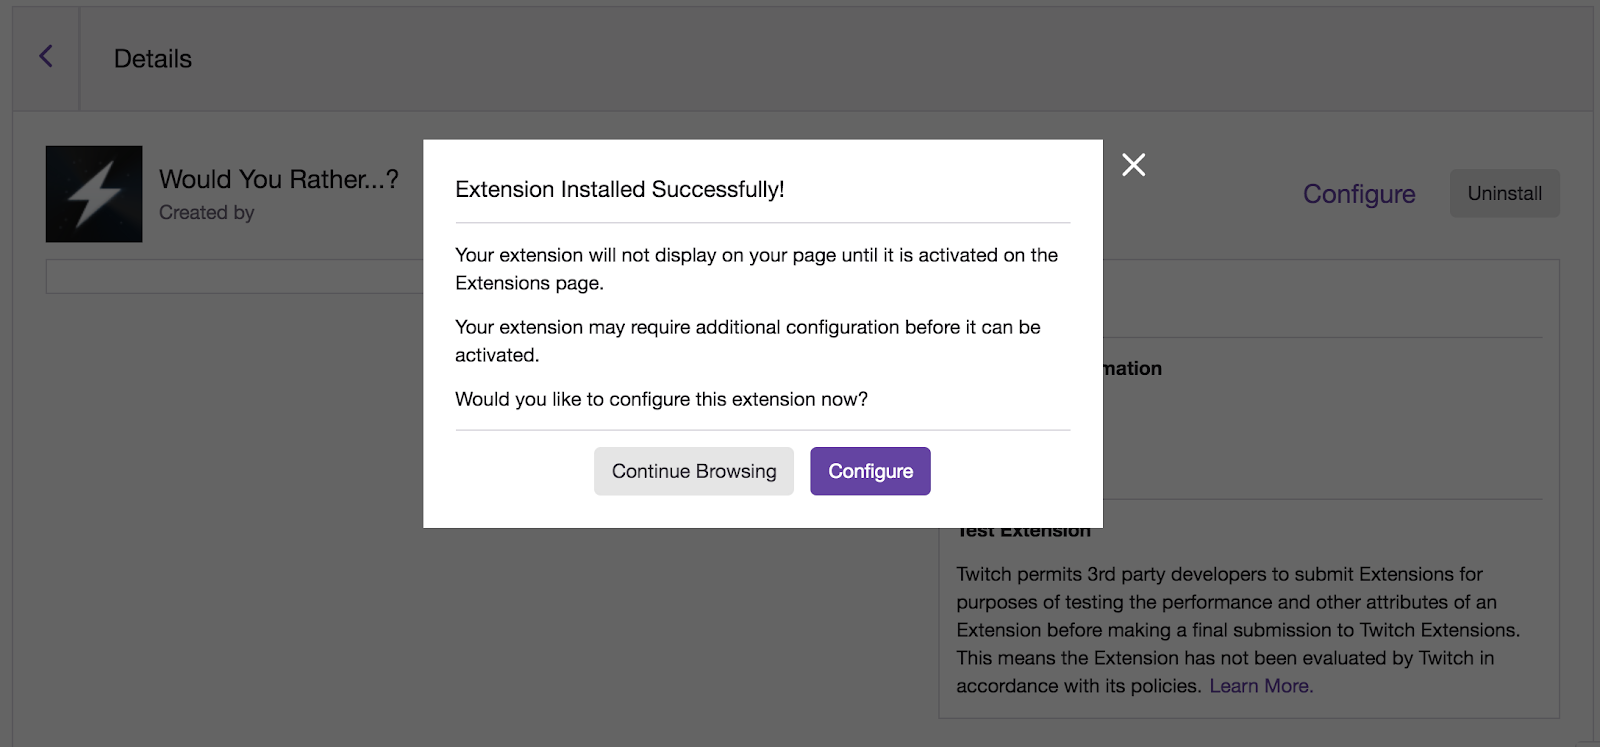 "Extension is installed" confirmation pop-up